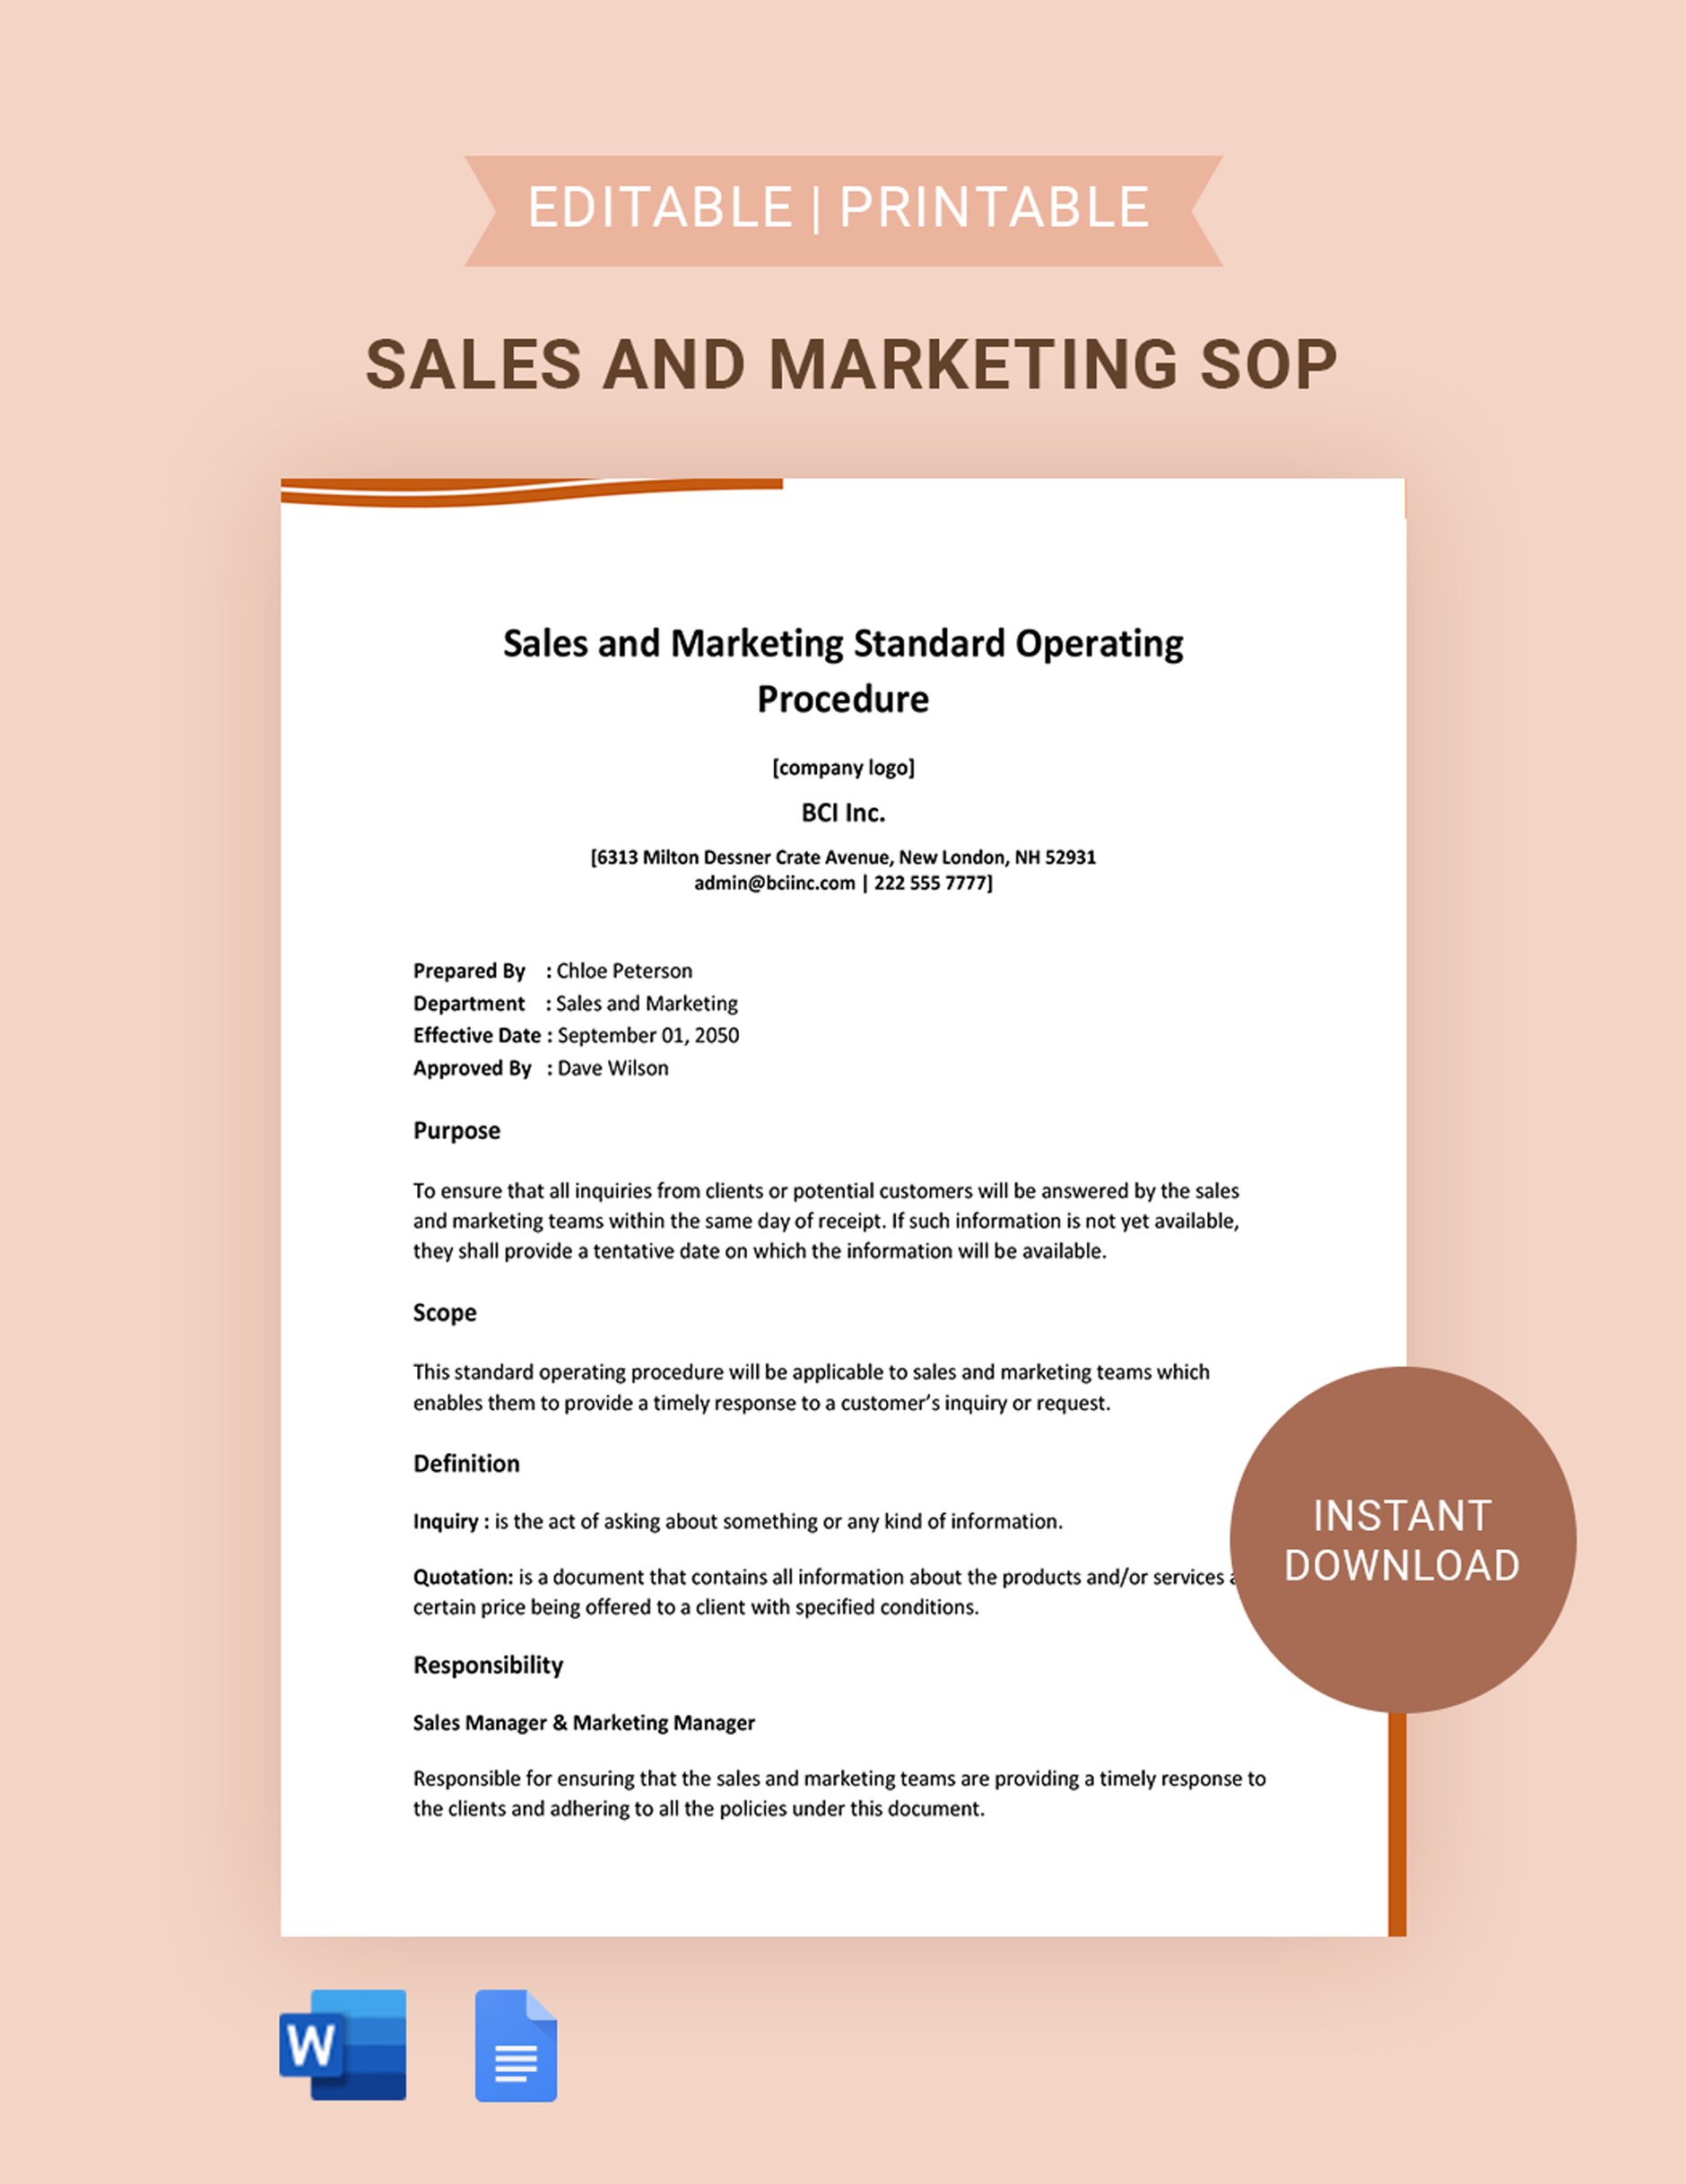 Sales and Marketing Standard Operating Procedure Template